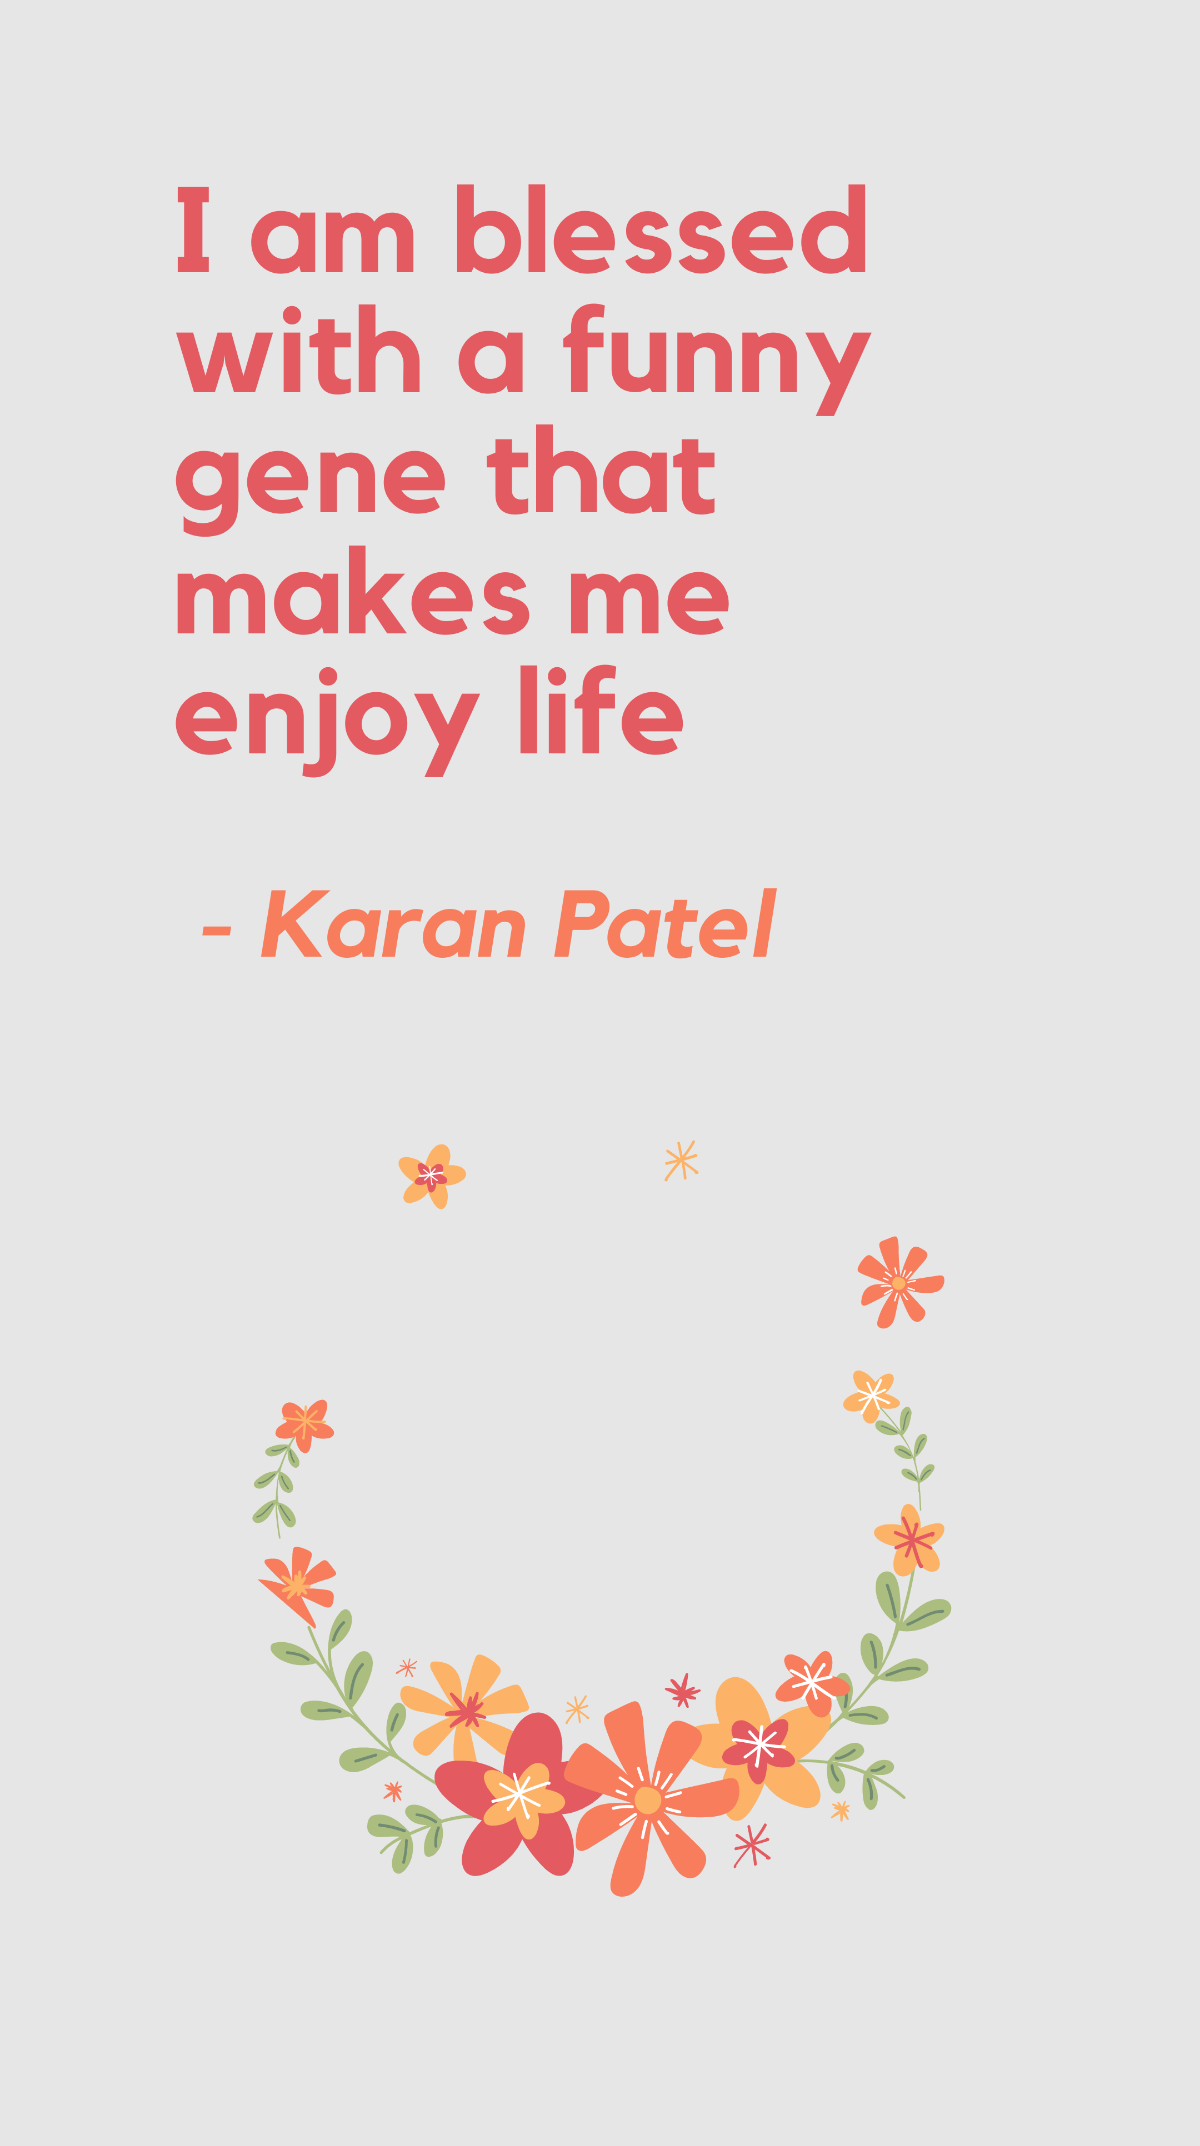 Karan Patel - I am blessed with a funny gene that makes me enjoy life Template